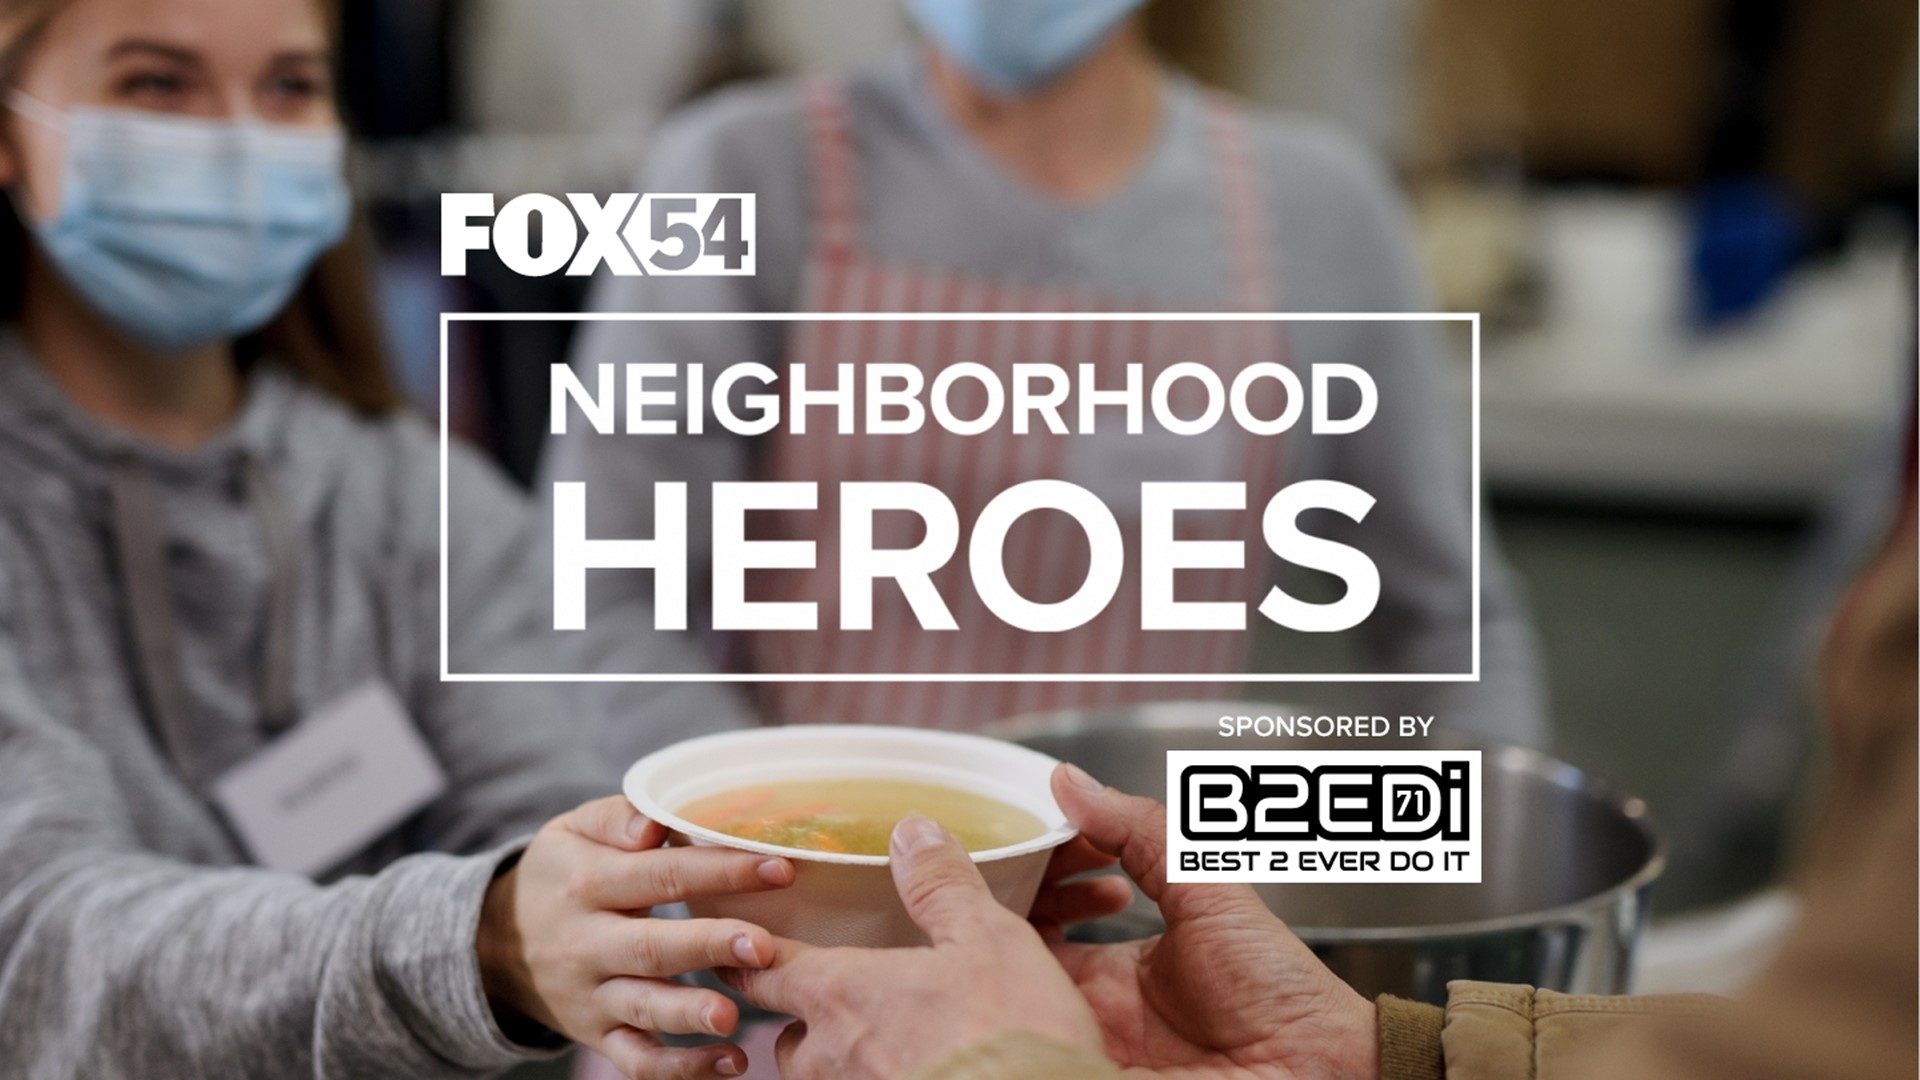 Nominate someone who goes above and beyond to serve their community to be honored on the FOX54 News.